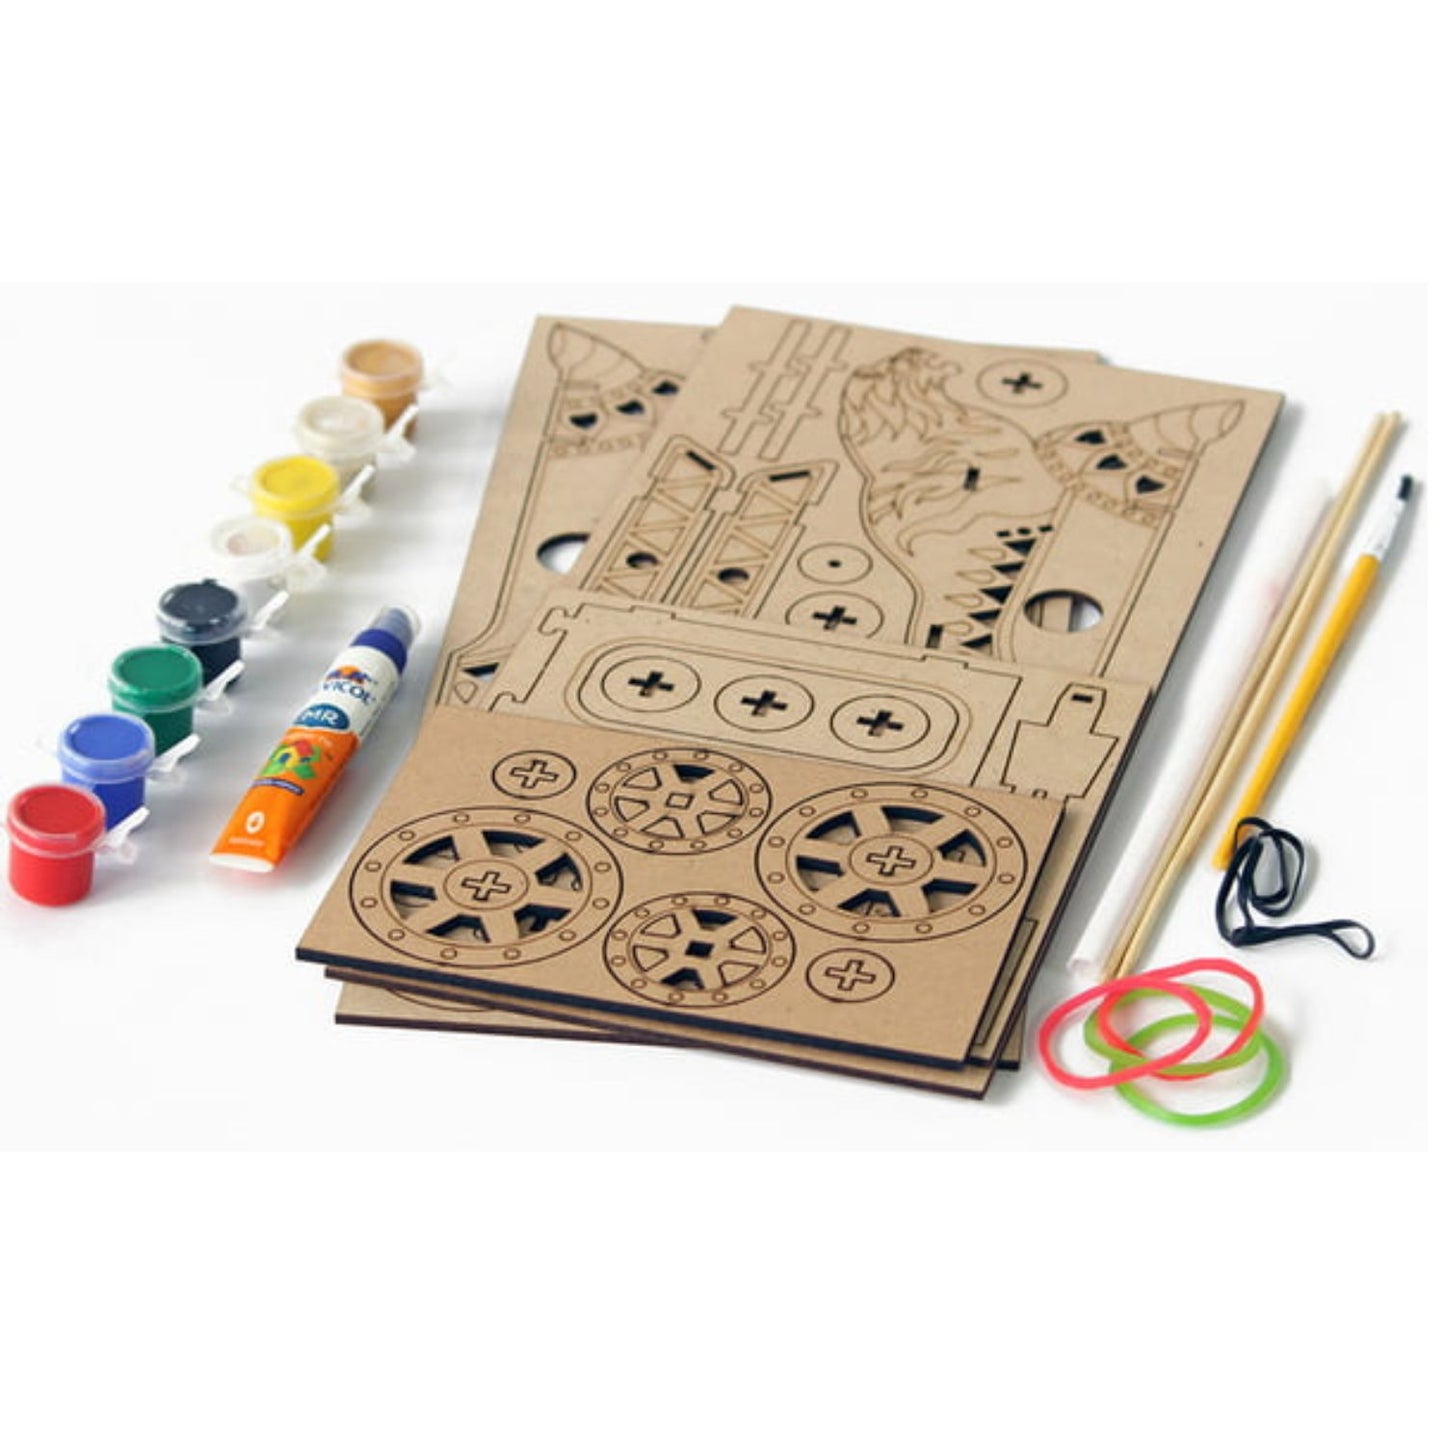 Funvention Pull-Back STEM Mechanical Da Vinci Chariot DIY Kit: Create 3D Wooden Chariot, Rotating Geared Blades, Brain & Activity Game Age 8+ Years